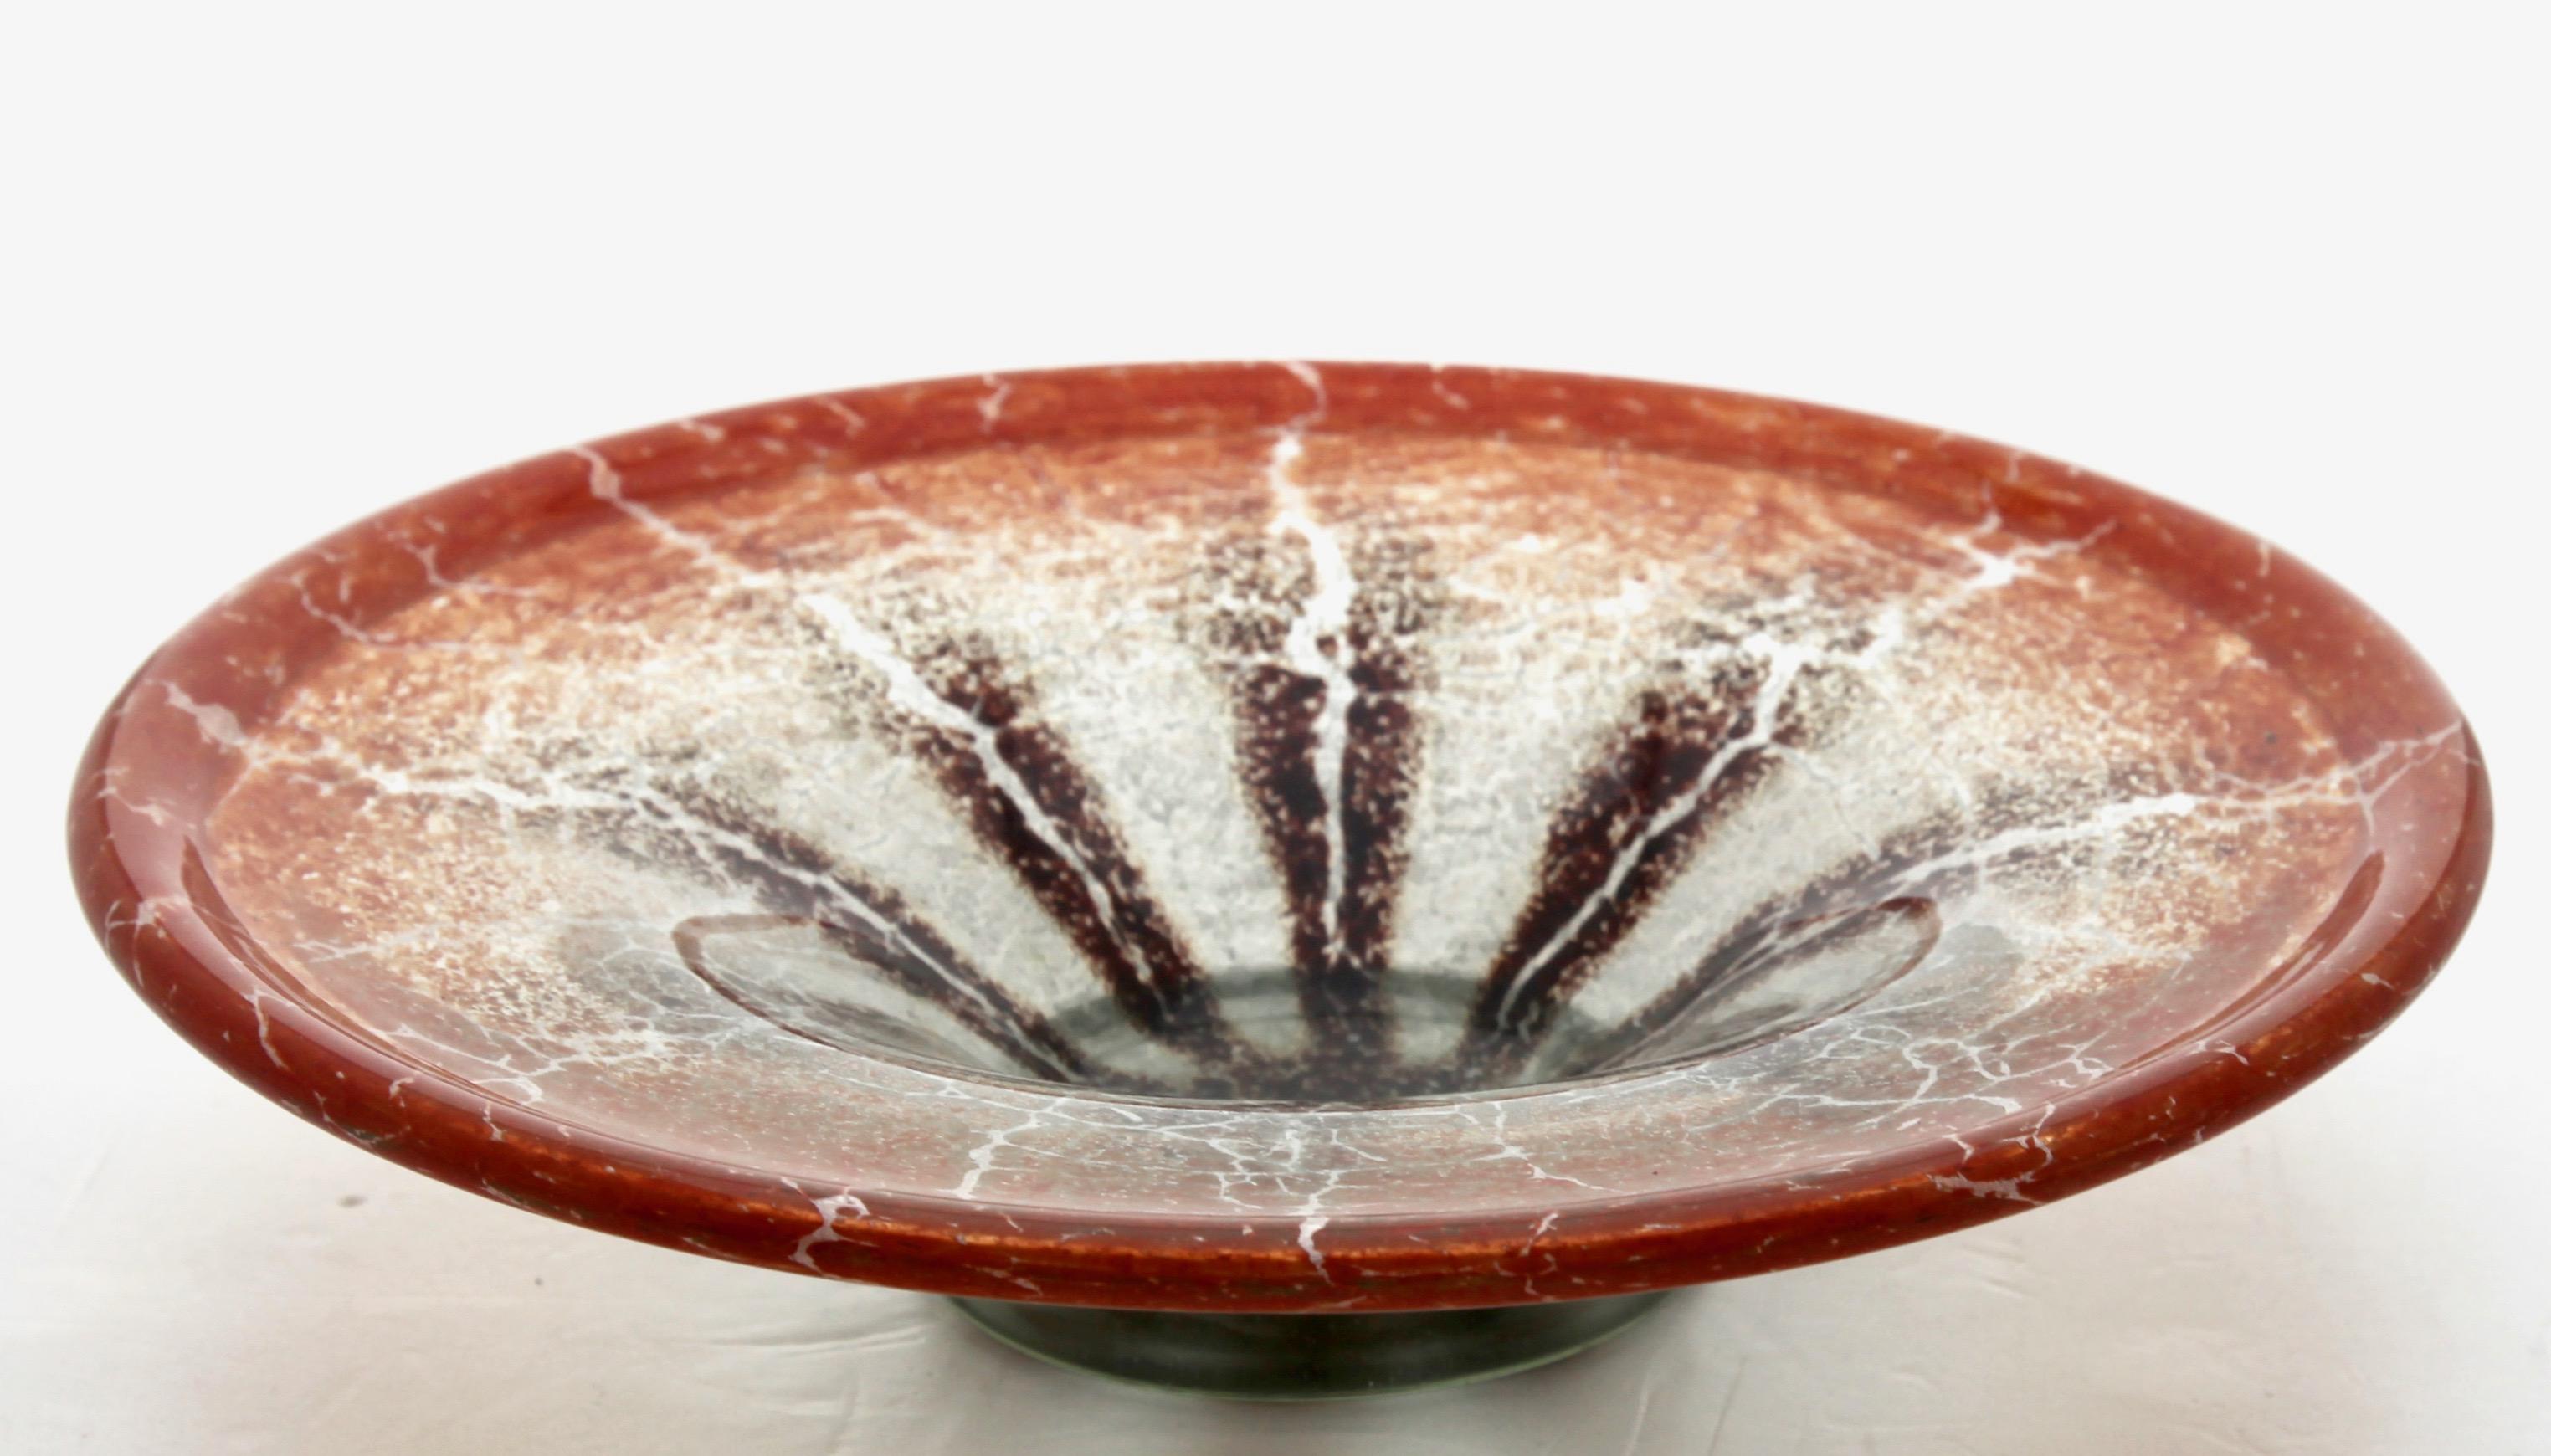 20th Century 'Ikora' Art Glass Bowl, Produced, by WMF in Germany, 1930s by Karl Wiedmann For Sale